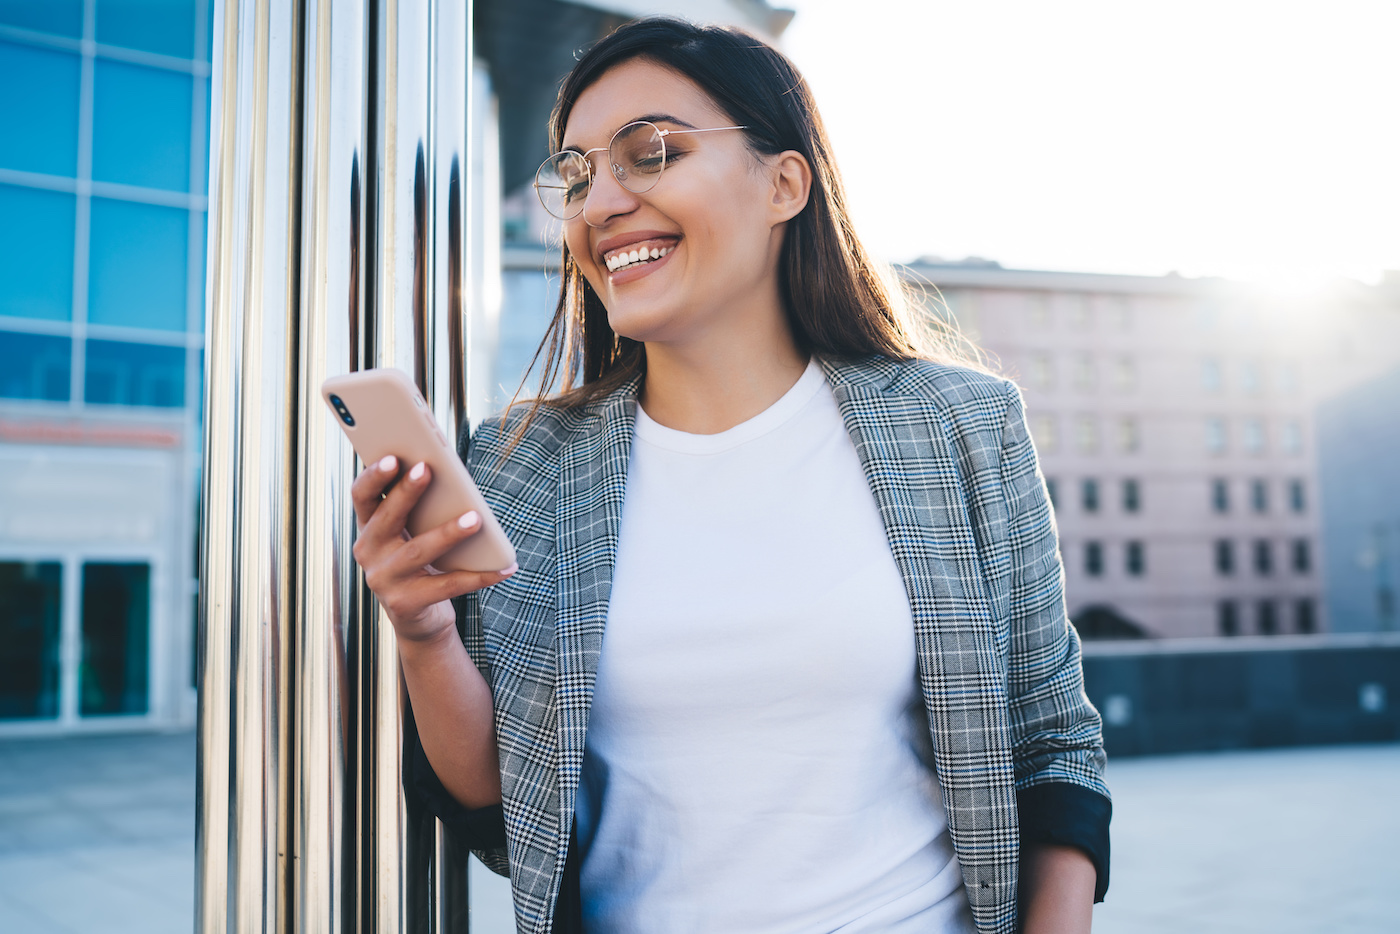 a woman smiling while holding a phone